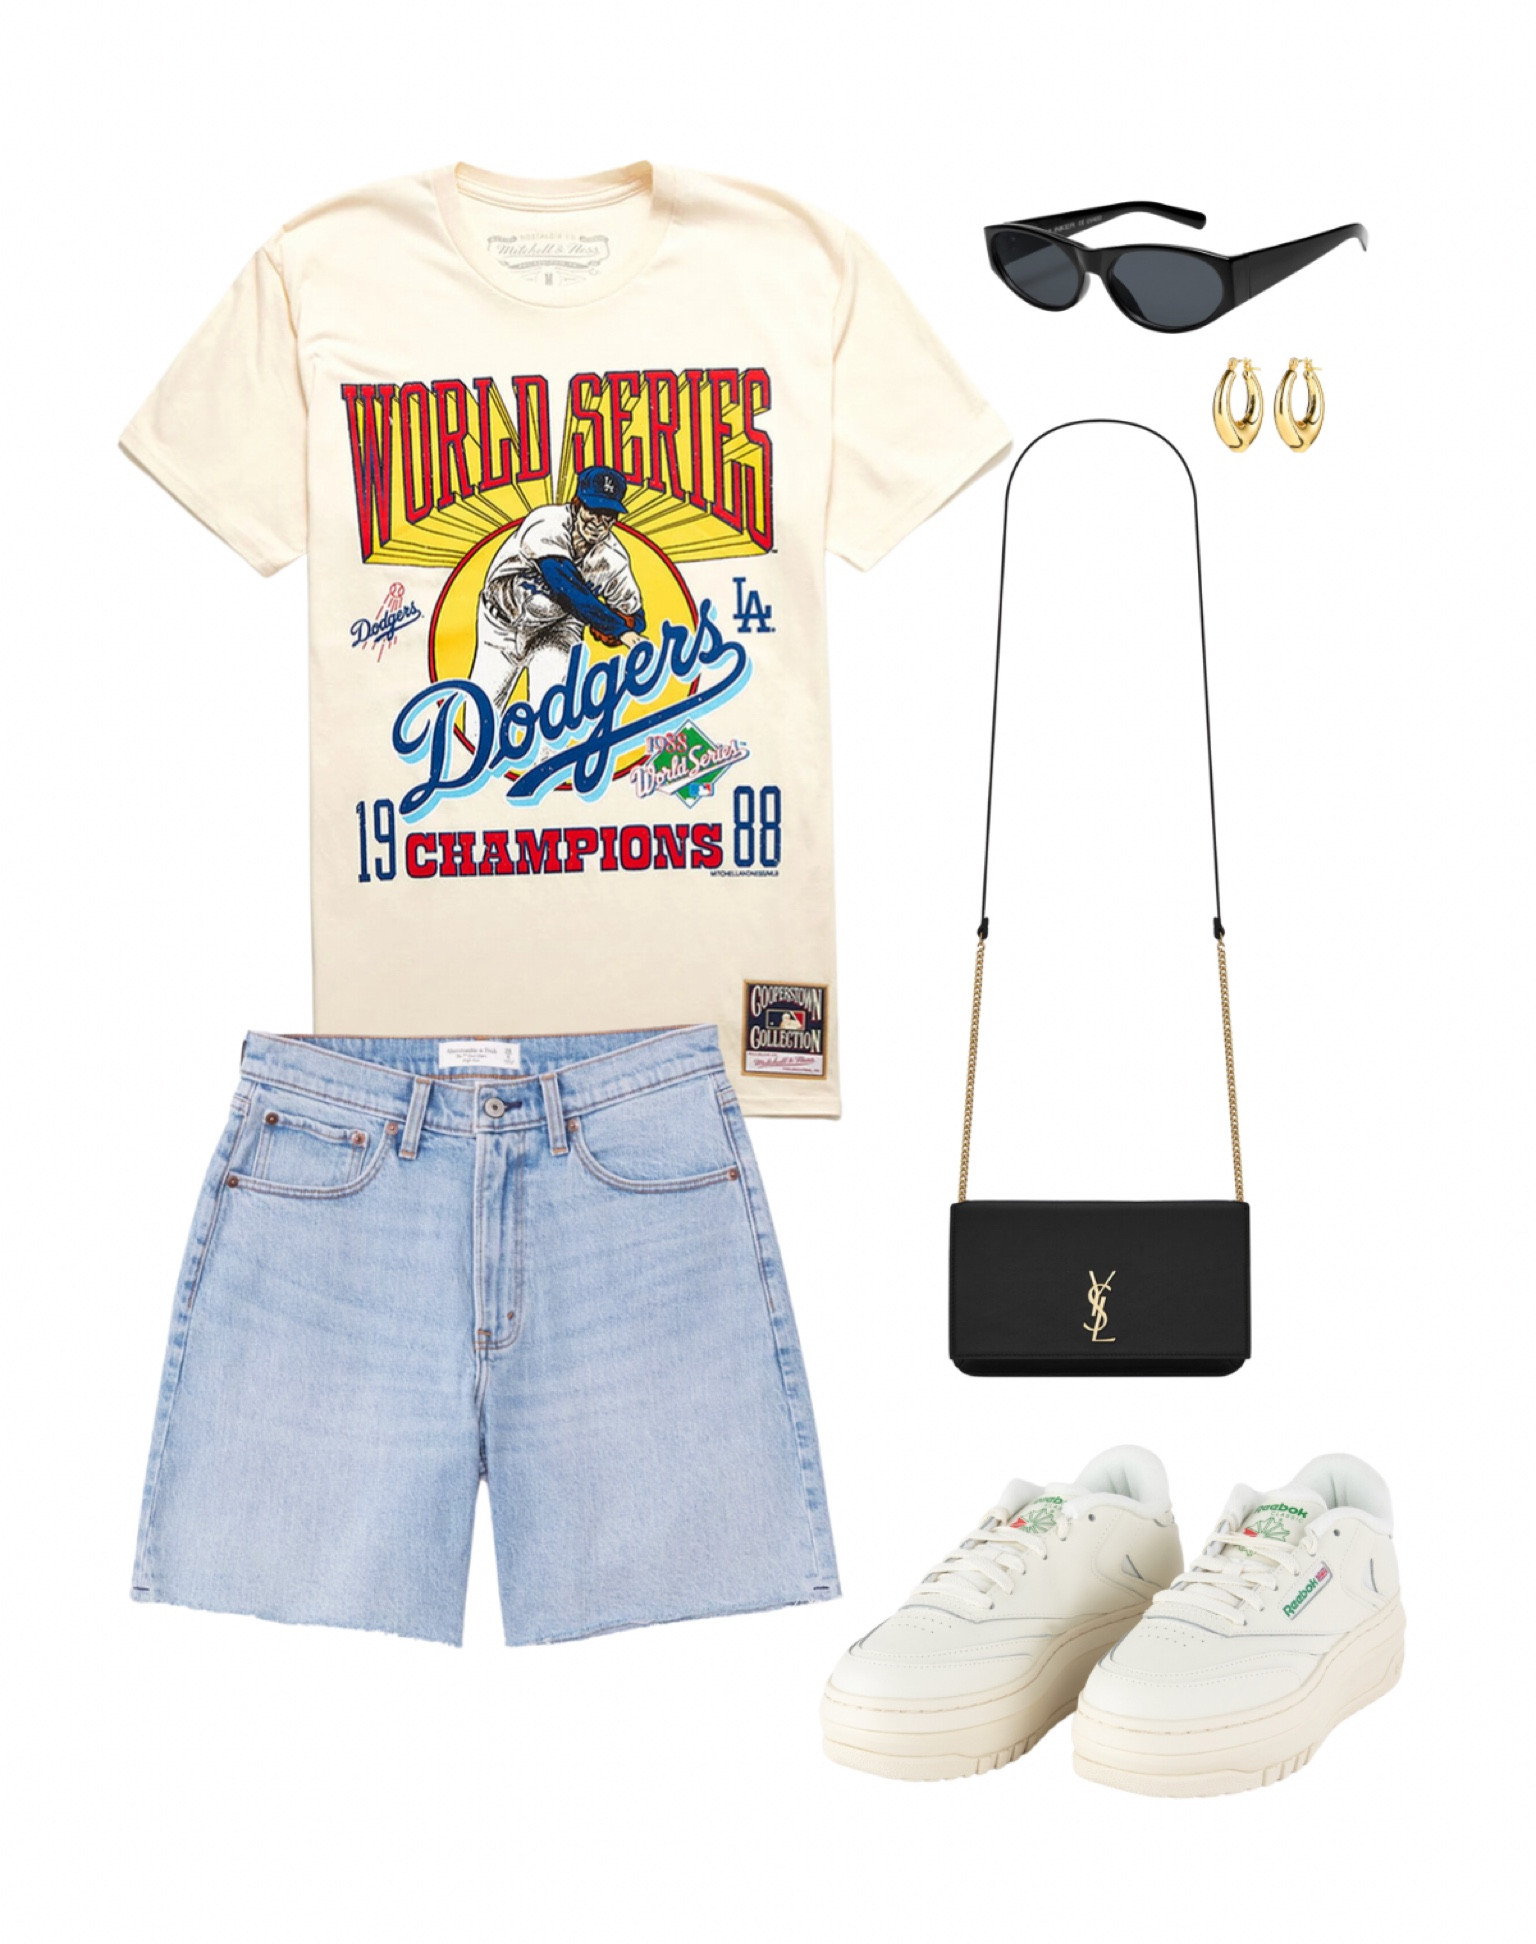 Dodger Outfit 